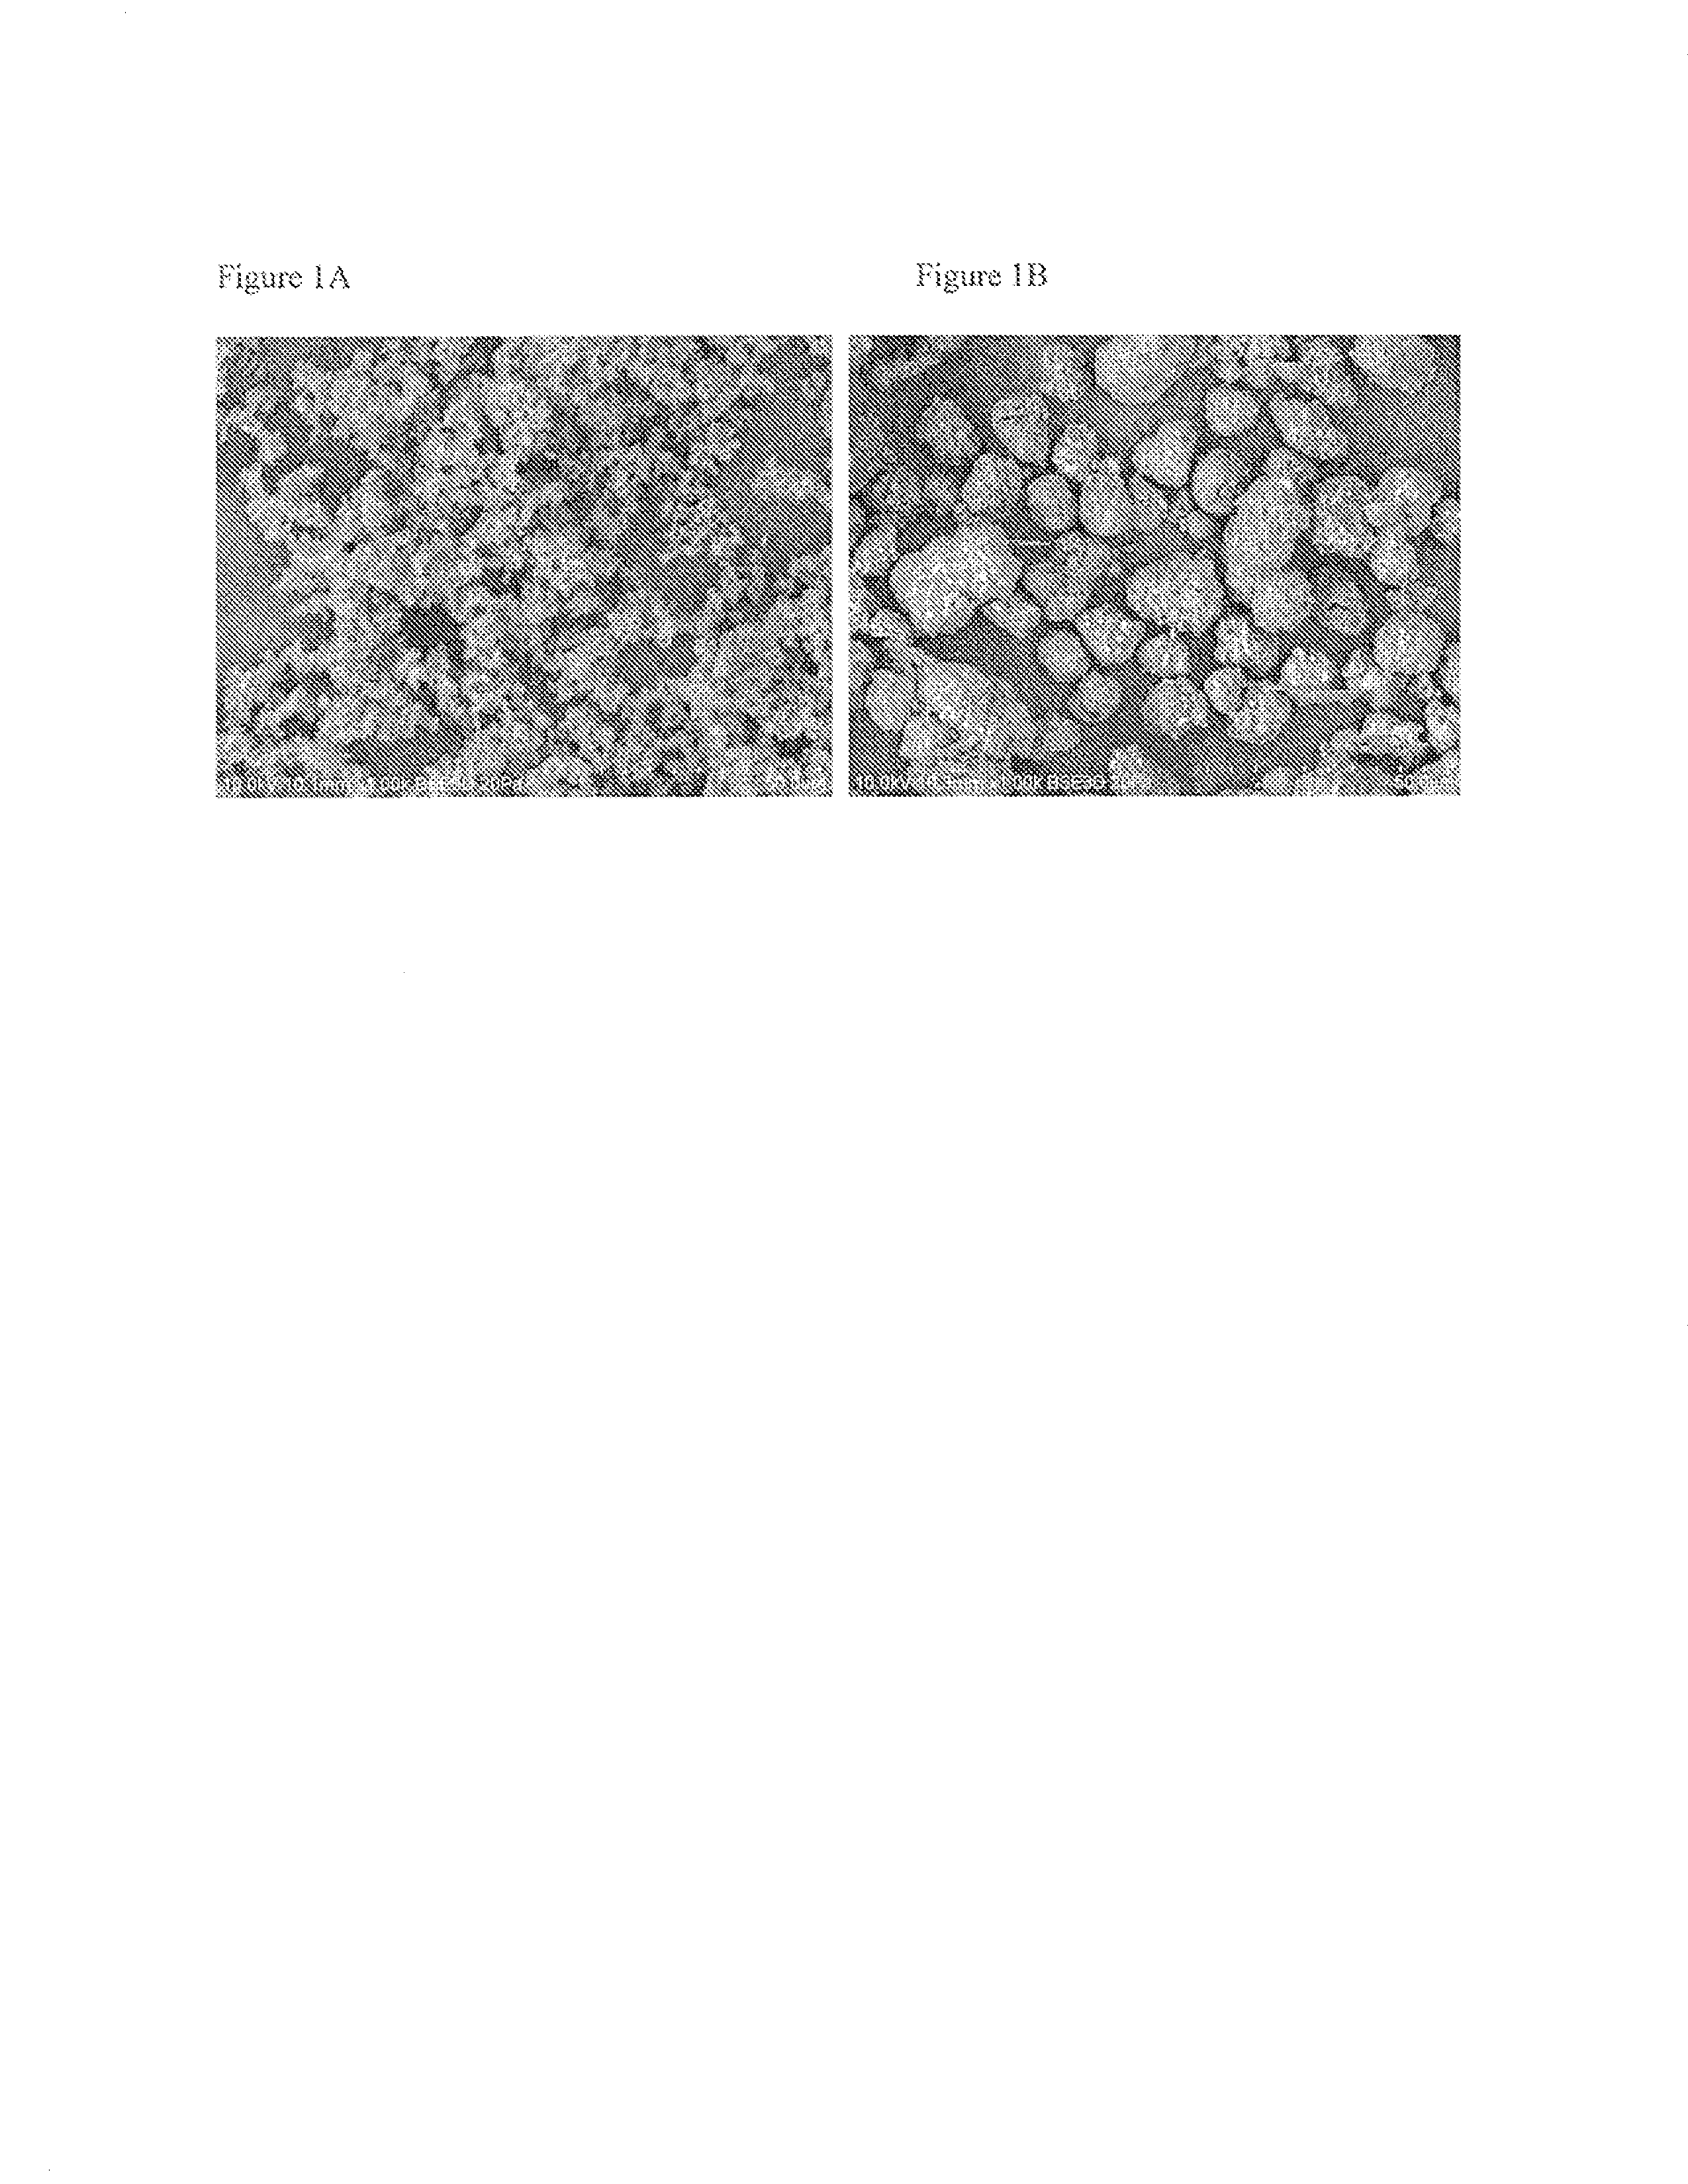 Compositions of substantially spherical particles and methods of making thereof